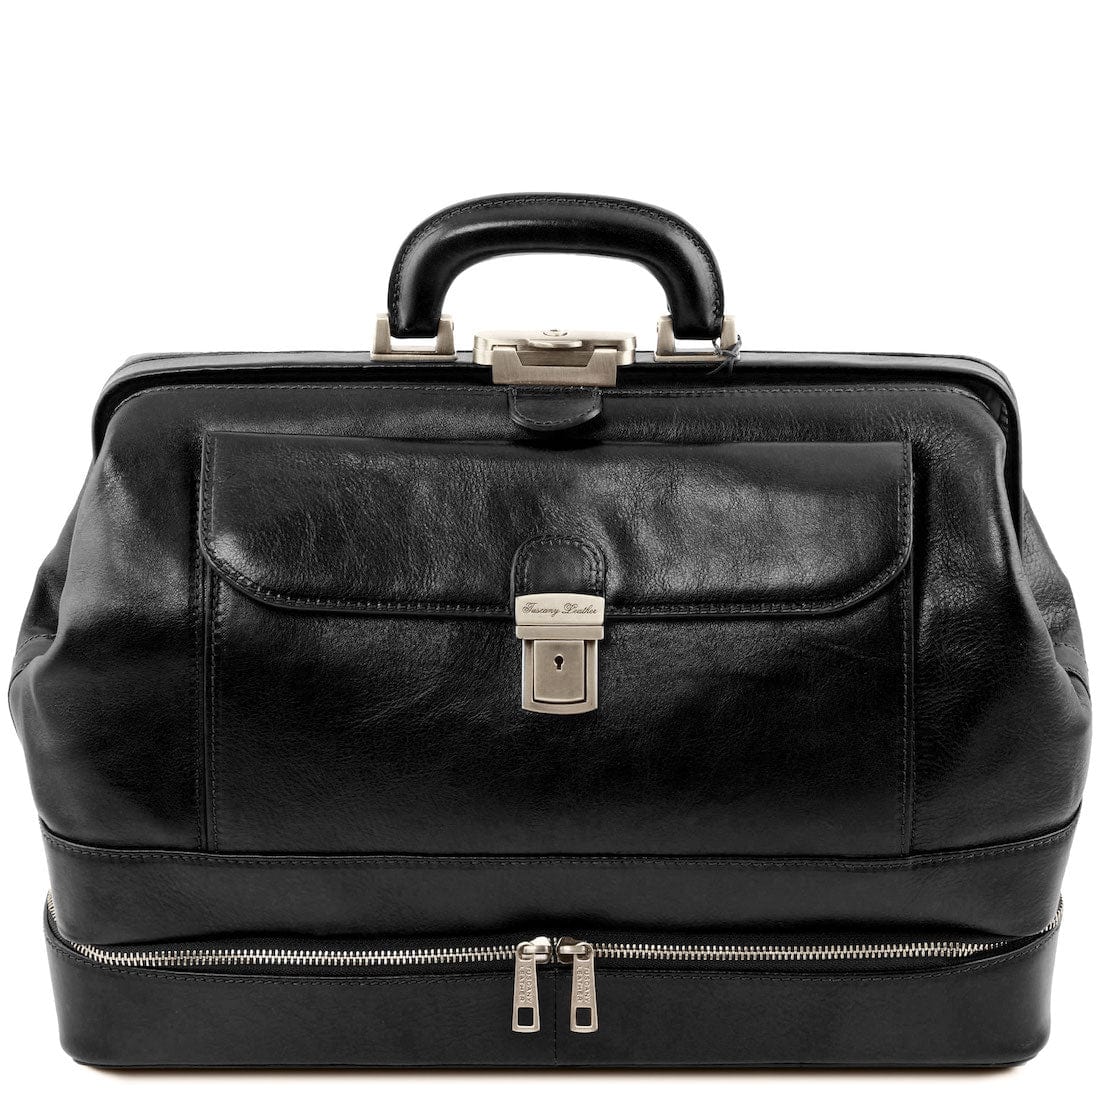 Giotto - Exclusive double-bottom leather doctor bag | TL142071 - Premium Doctor bags - Shop now at San Rocco Italia